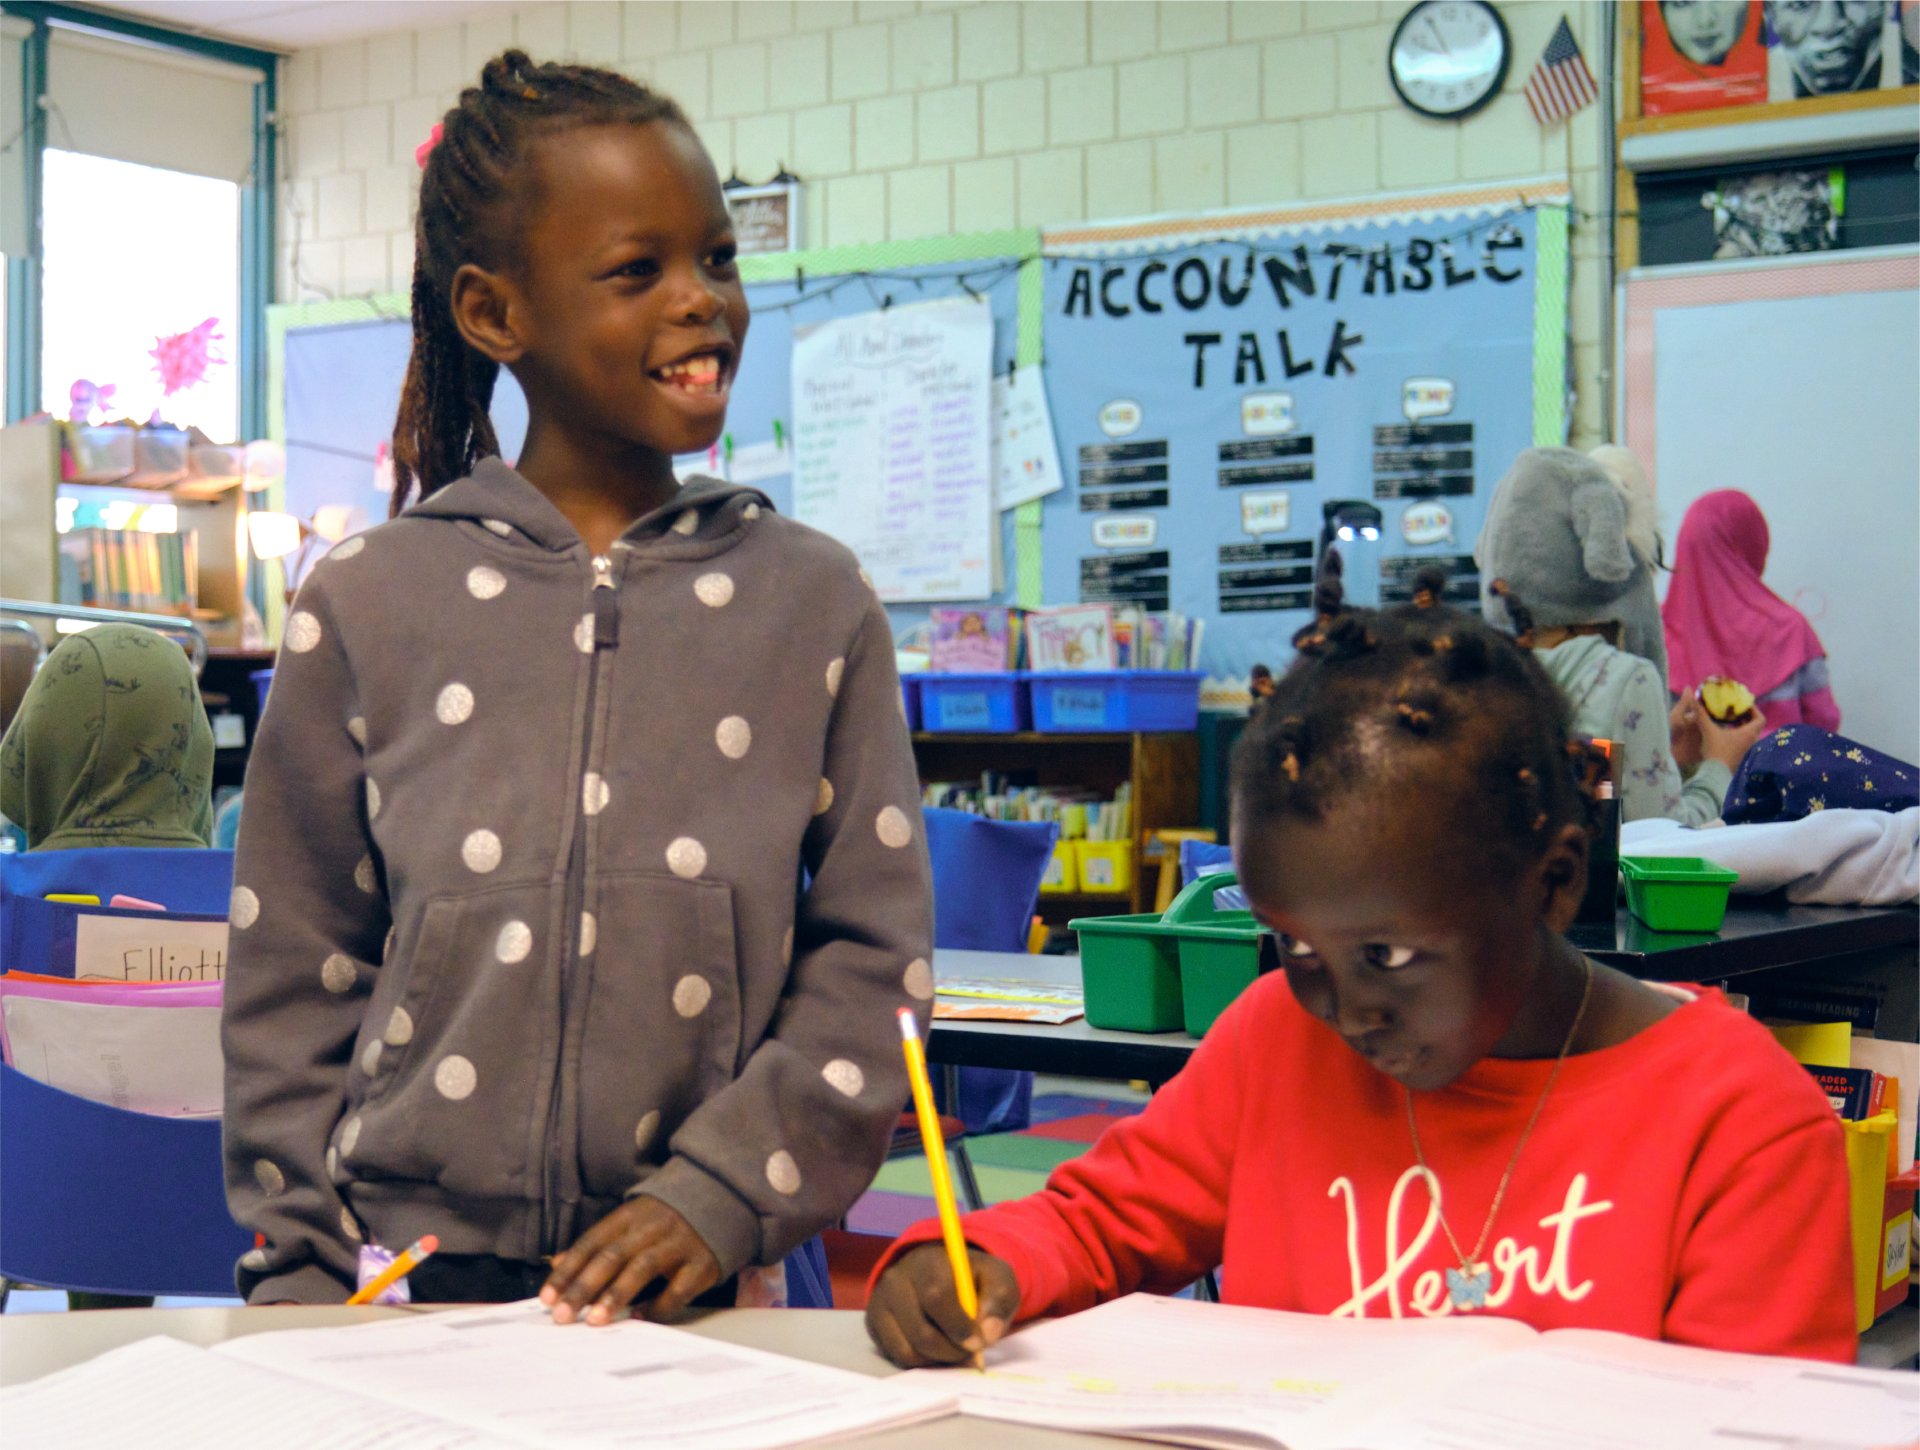 Two young girls in a literacy intervention classroom setting; one standing and smiling, and the other seated, focused on writing in a notebook.